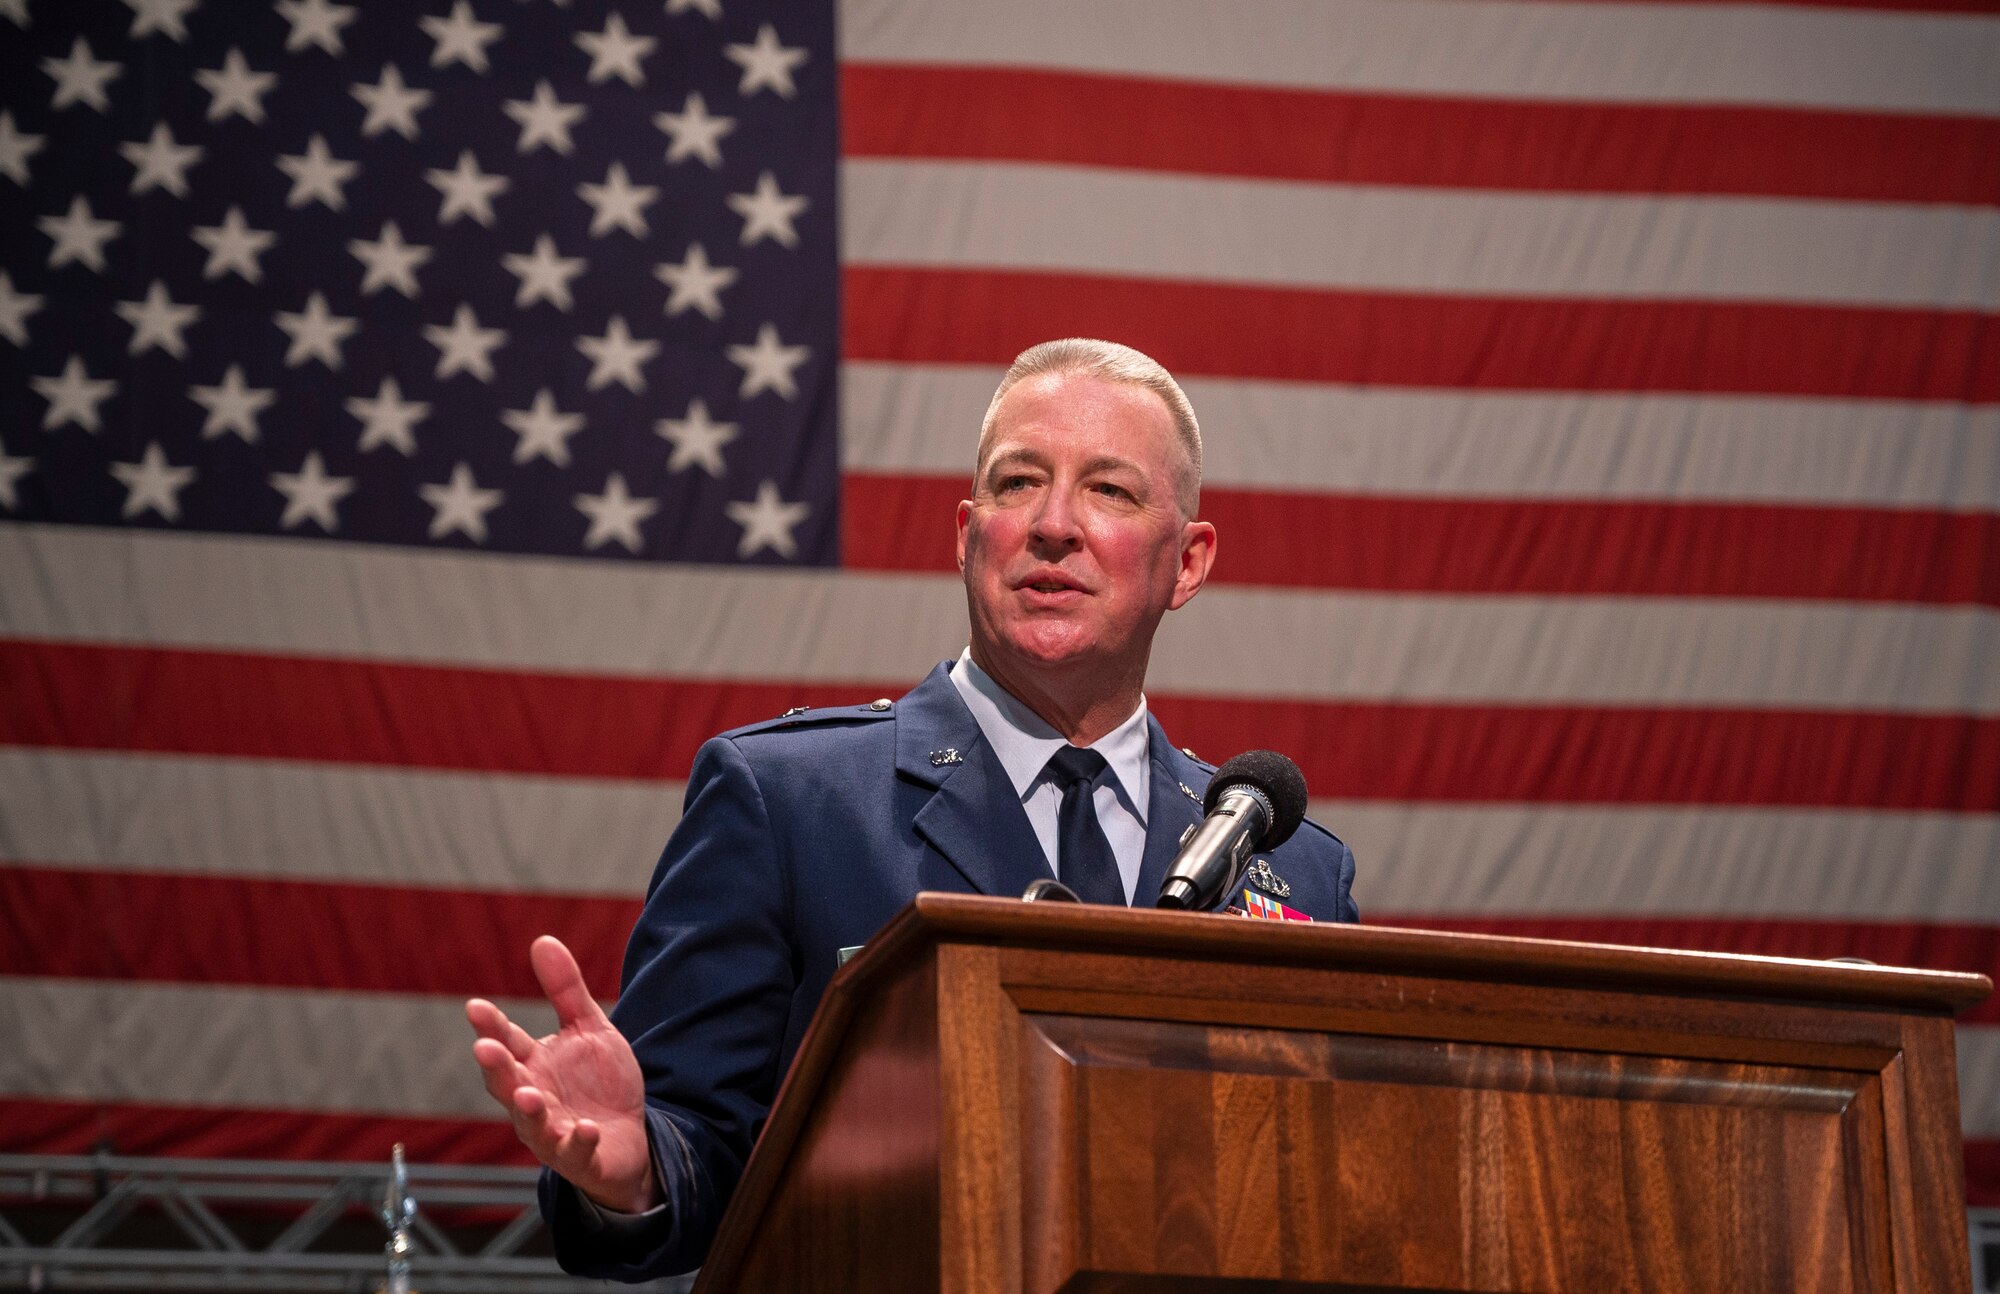 The 2020 Air Force Materiel Command Foreign Liaison Officer Recognition ceremony at the National Museum of the United States Air Force, Wright-Patterson Air Force Base, Ohio, Oct. 26, 2020.